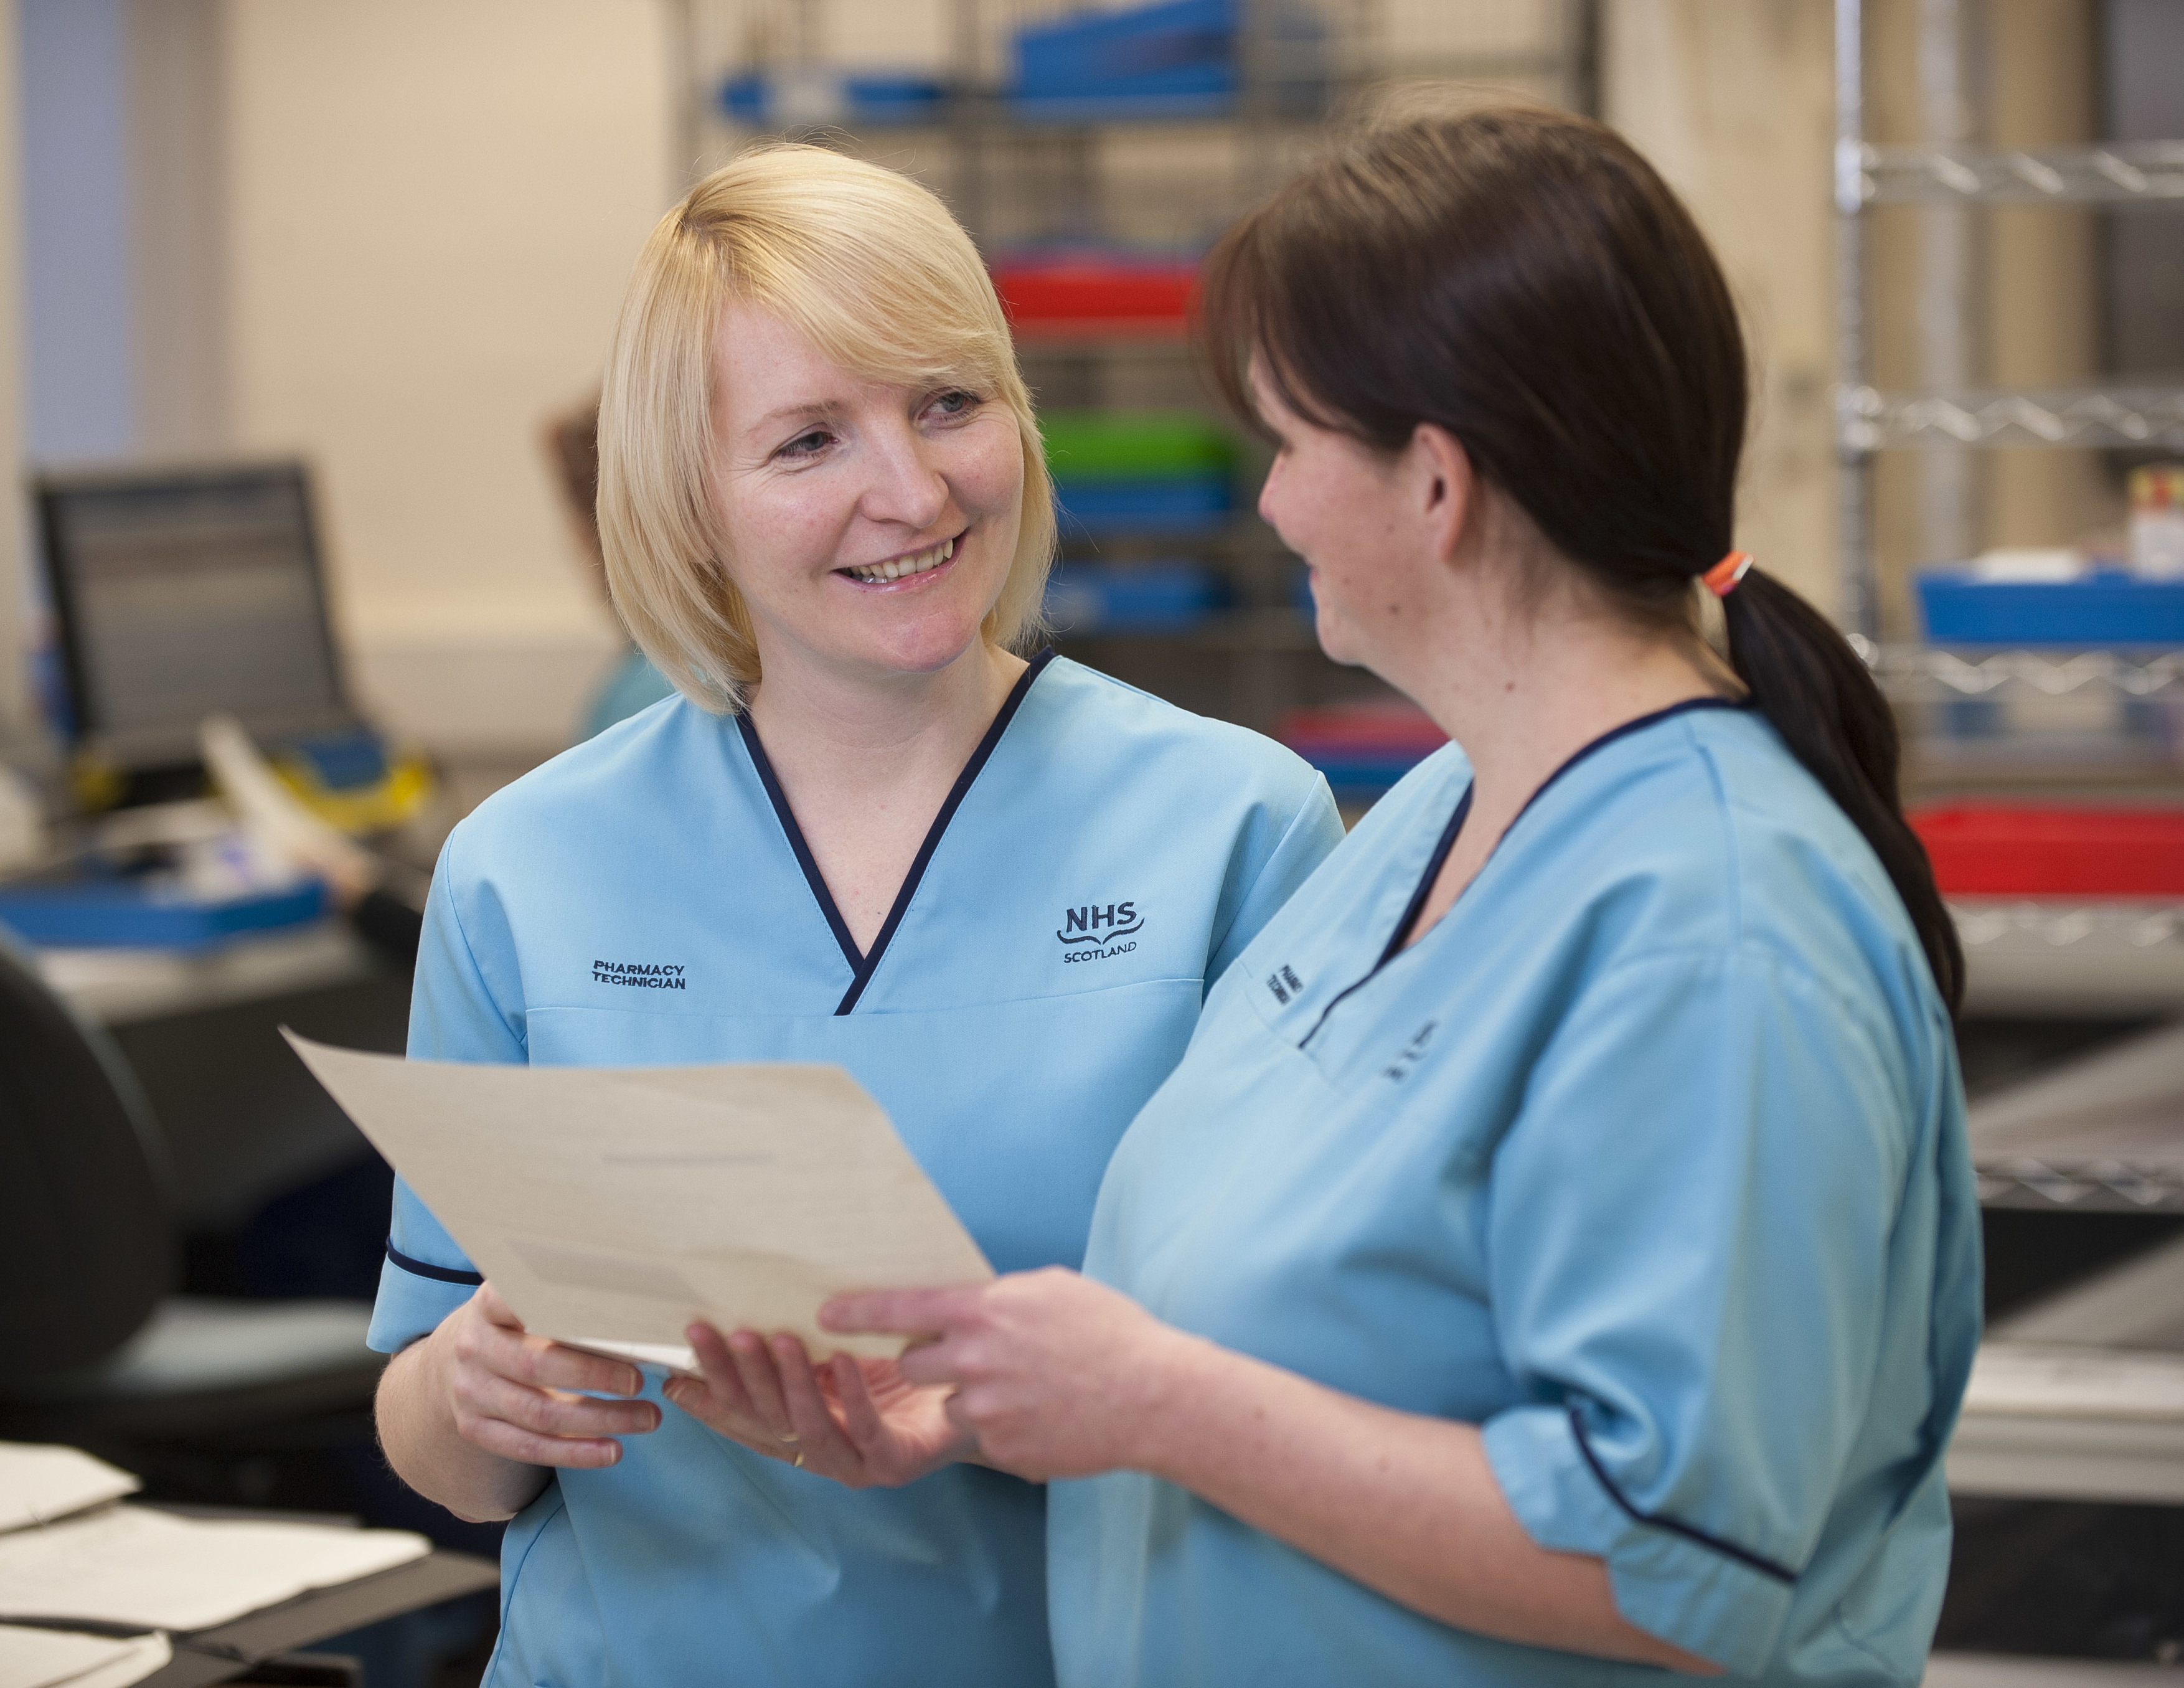 NHS Scotland nurse staff speaking to each other at a station on a ward.